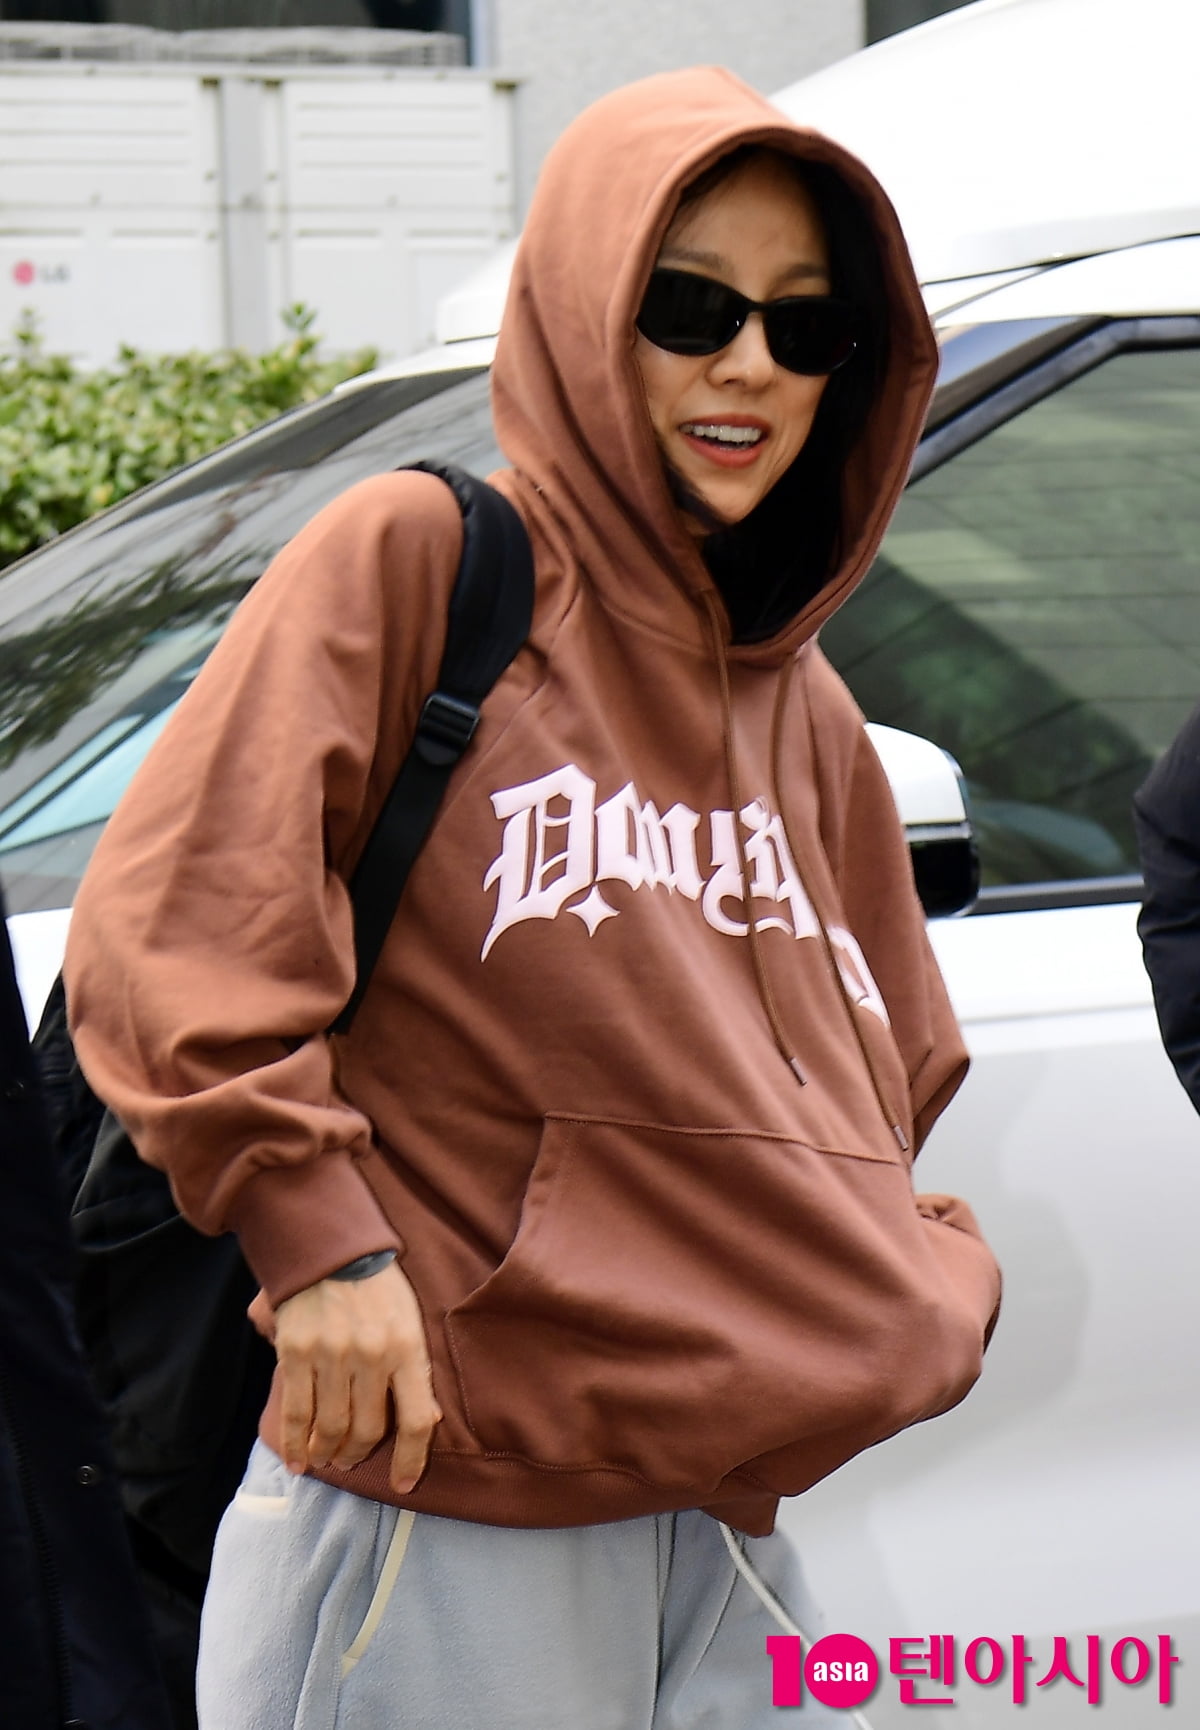 Hyori Lee, a strong sister who knows how to feel, on her way to work...beautiful smile